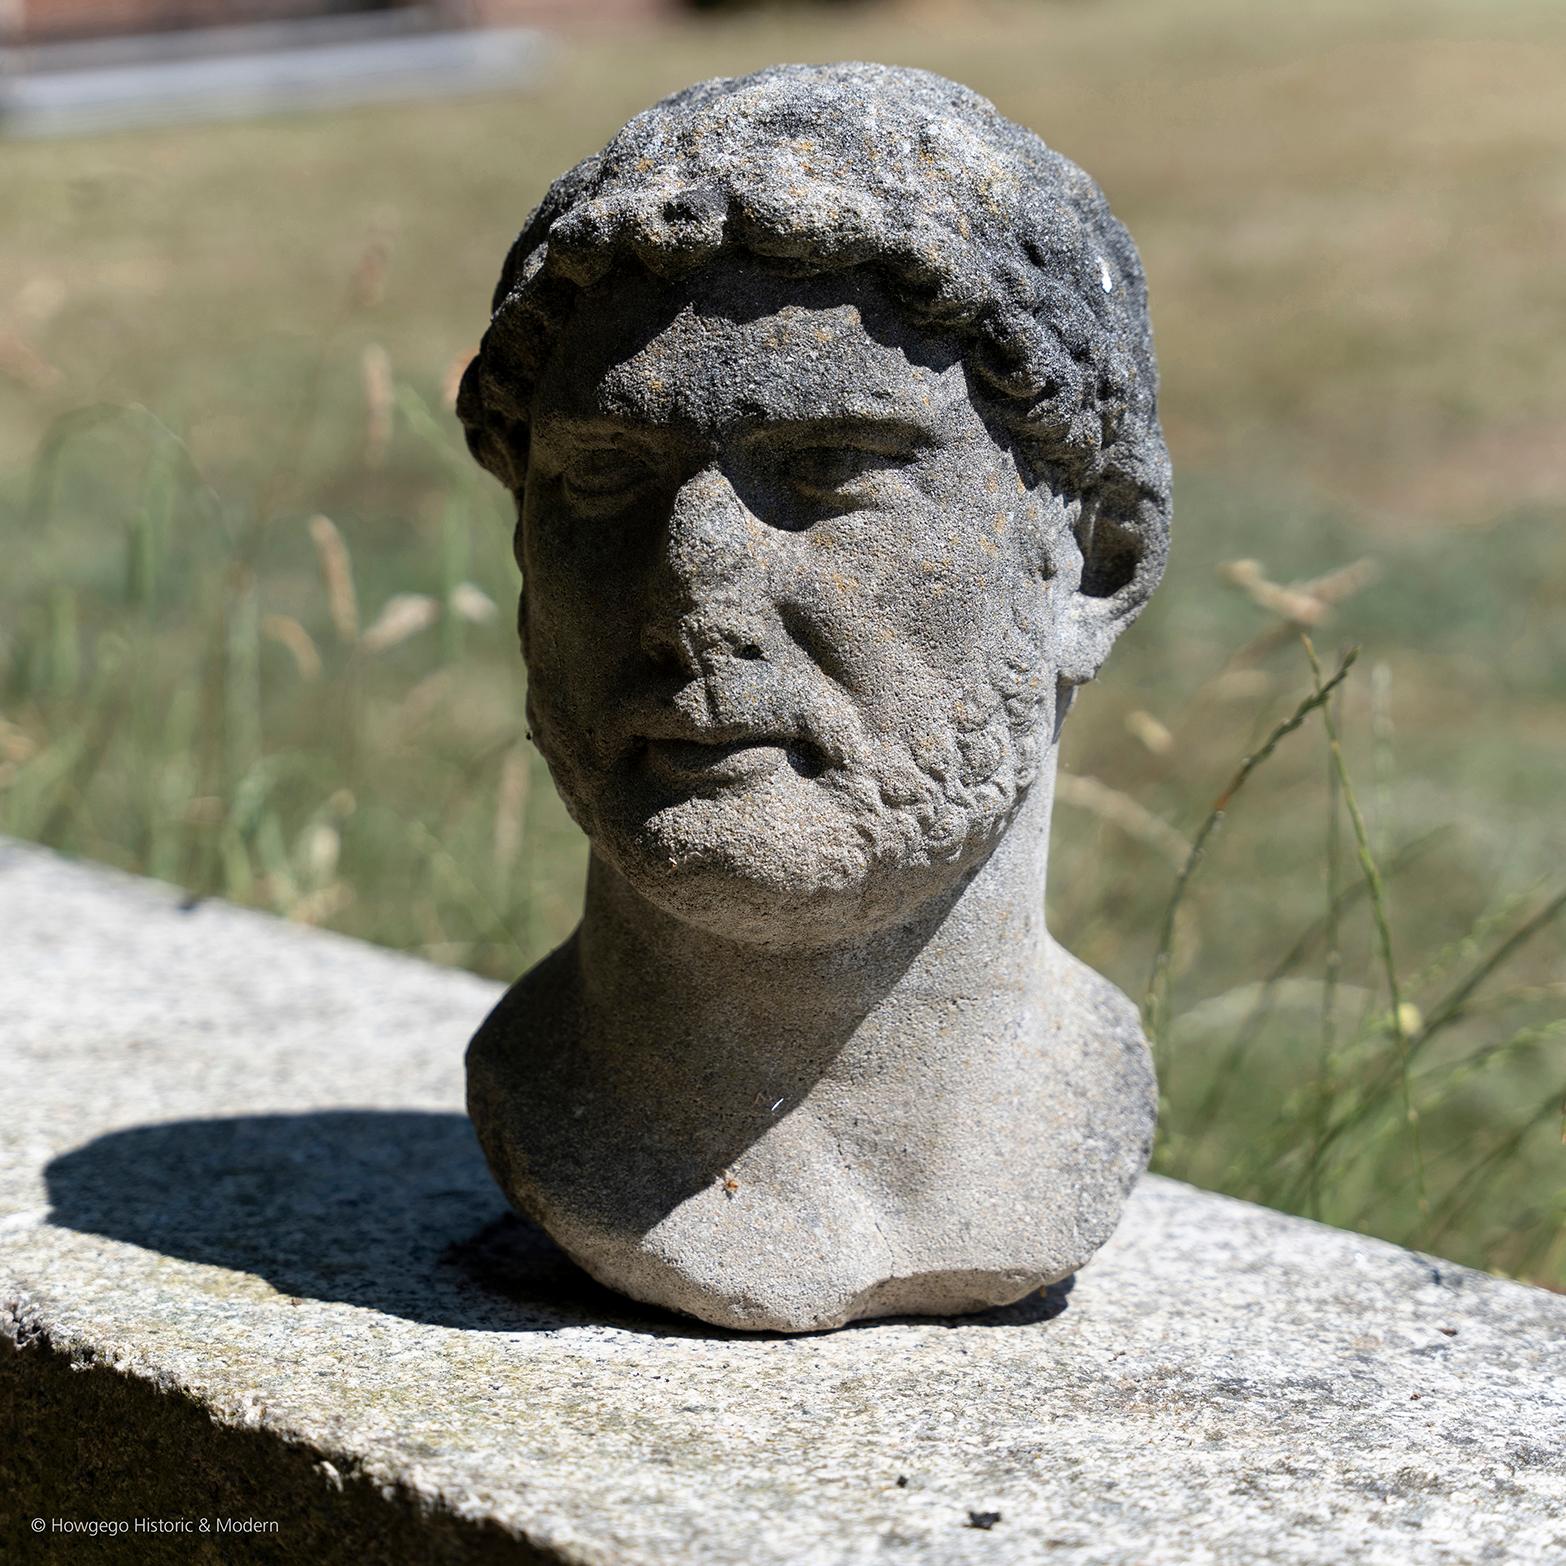 After the antique. This bust conveys the character of Brutus his courage, strength, power, nobility, honour and conviction. 
Measures: height 34cm., 13.5